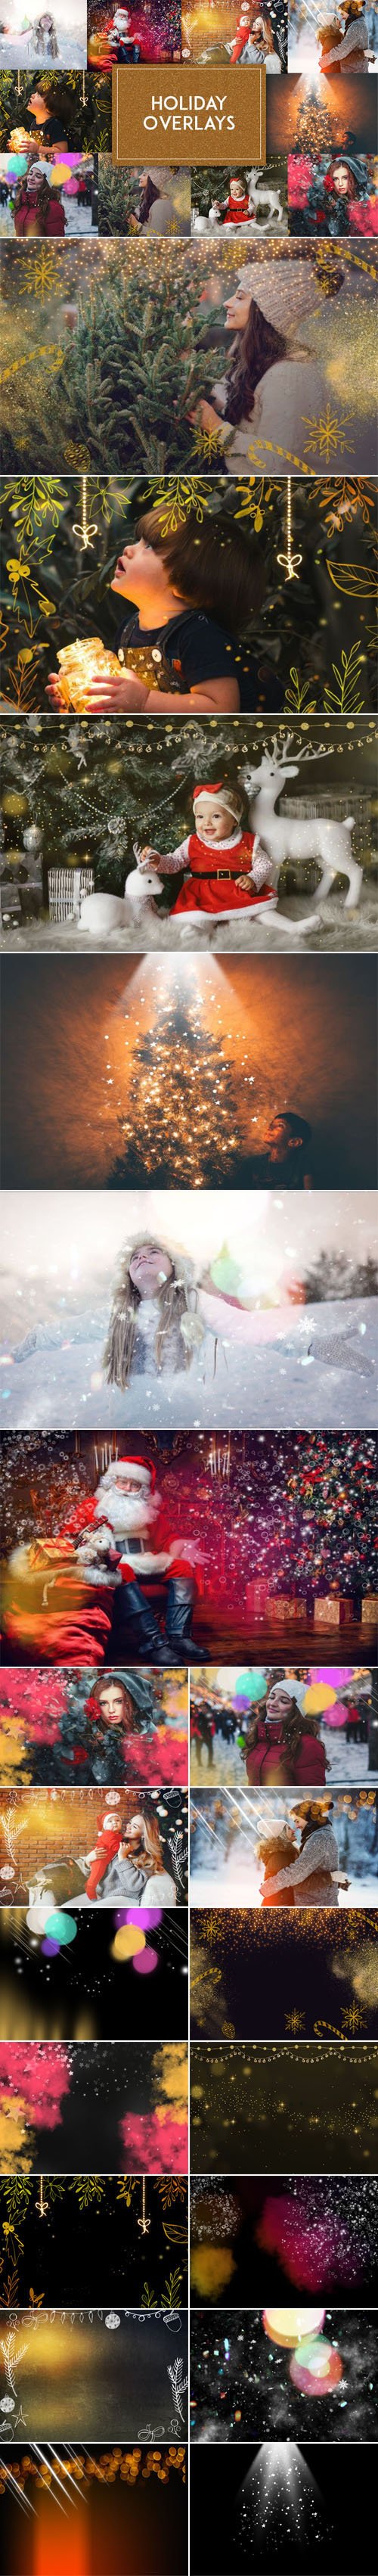 Holiday Overlays Collection for Photoshop